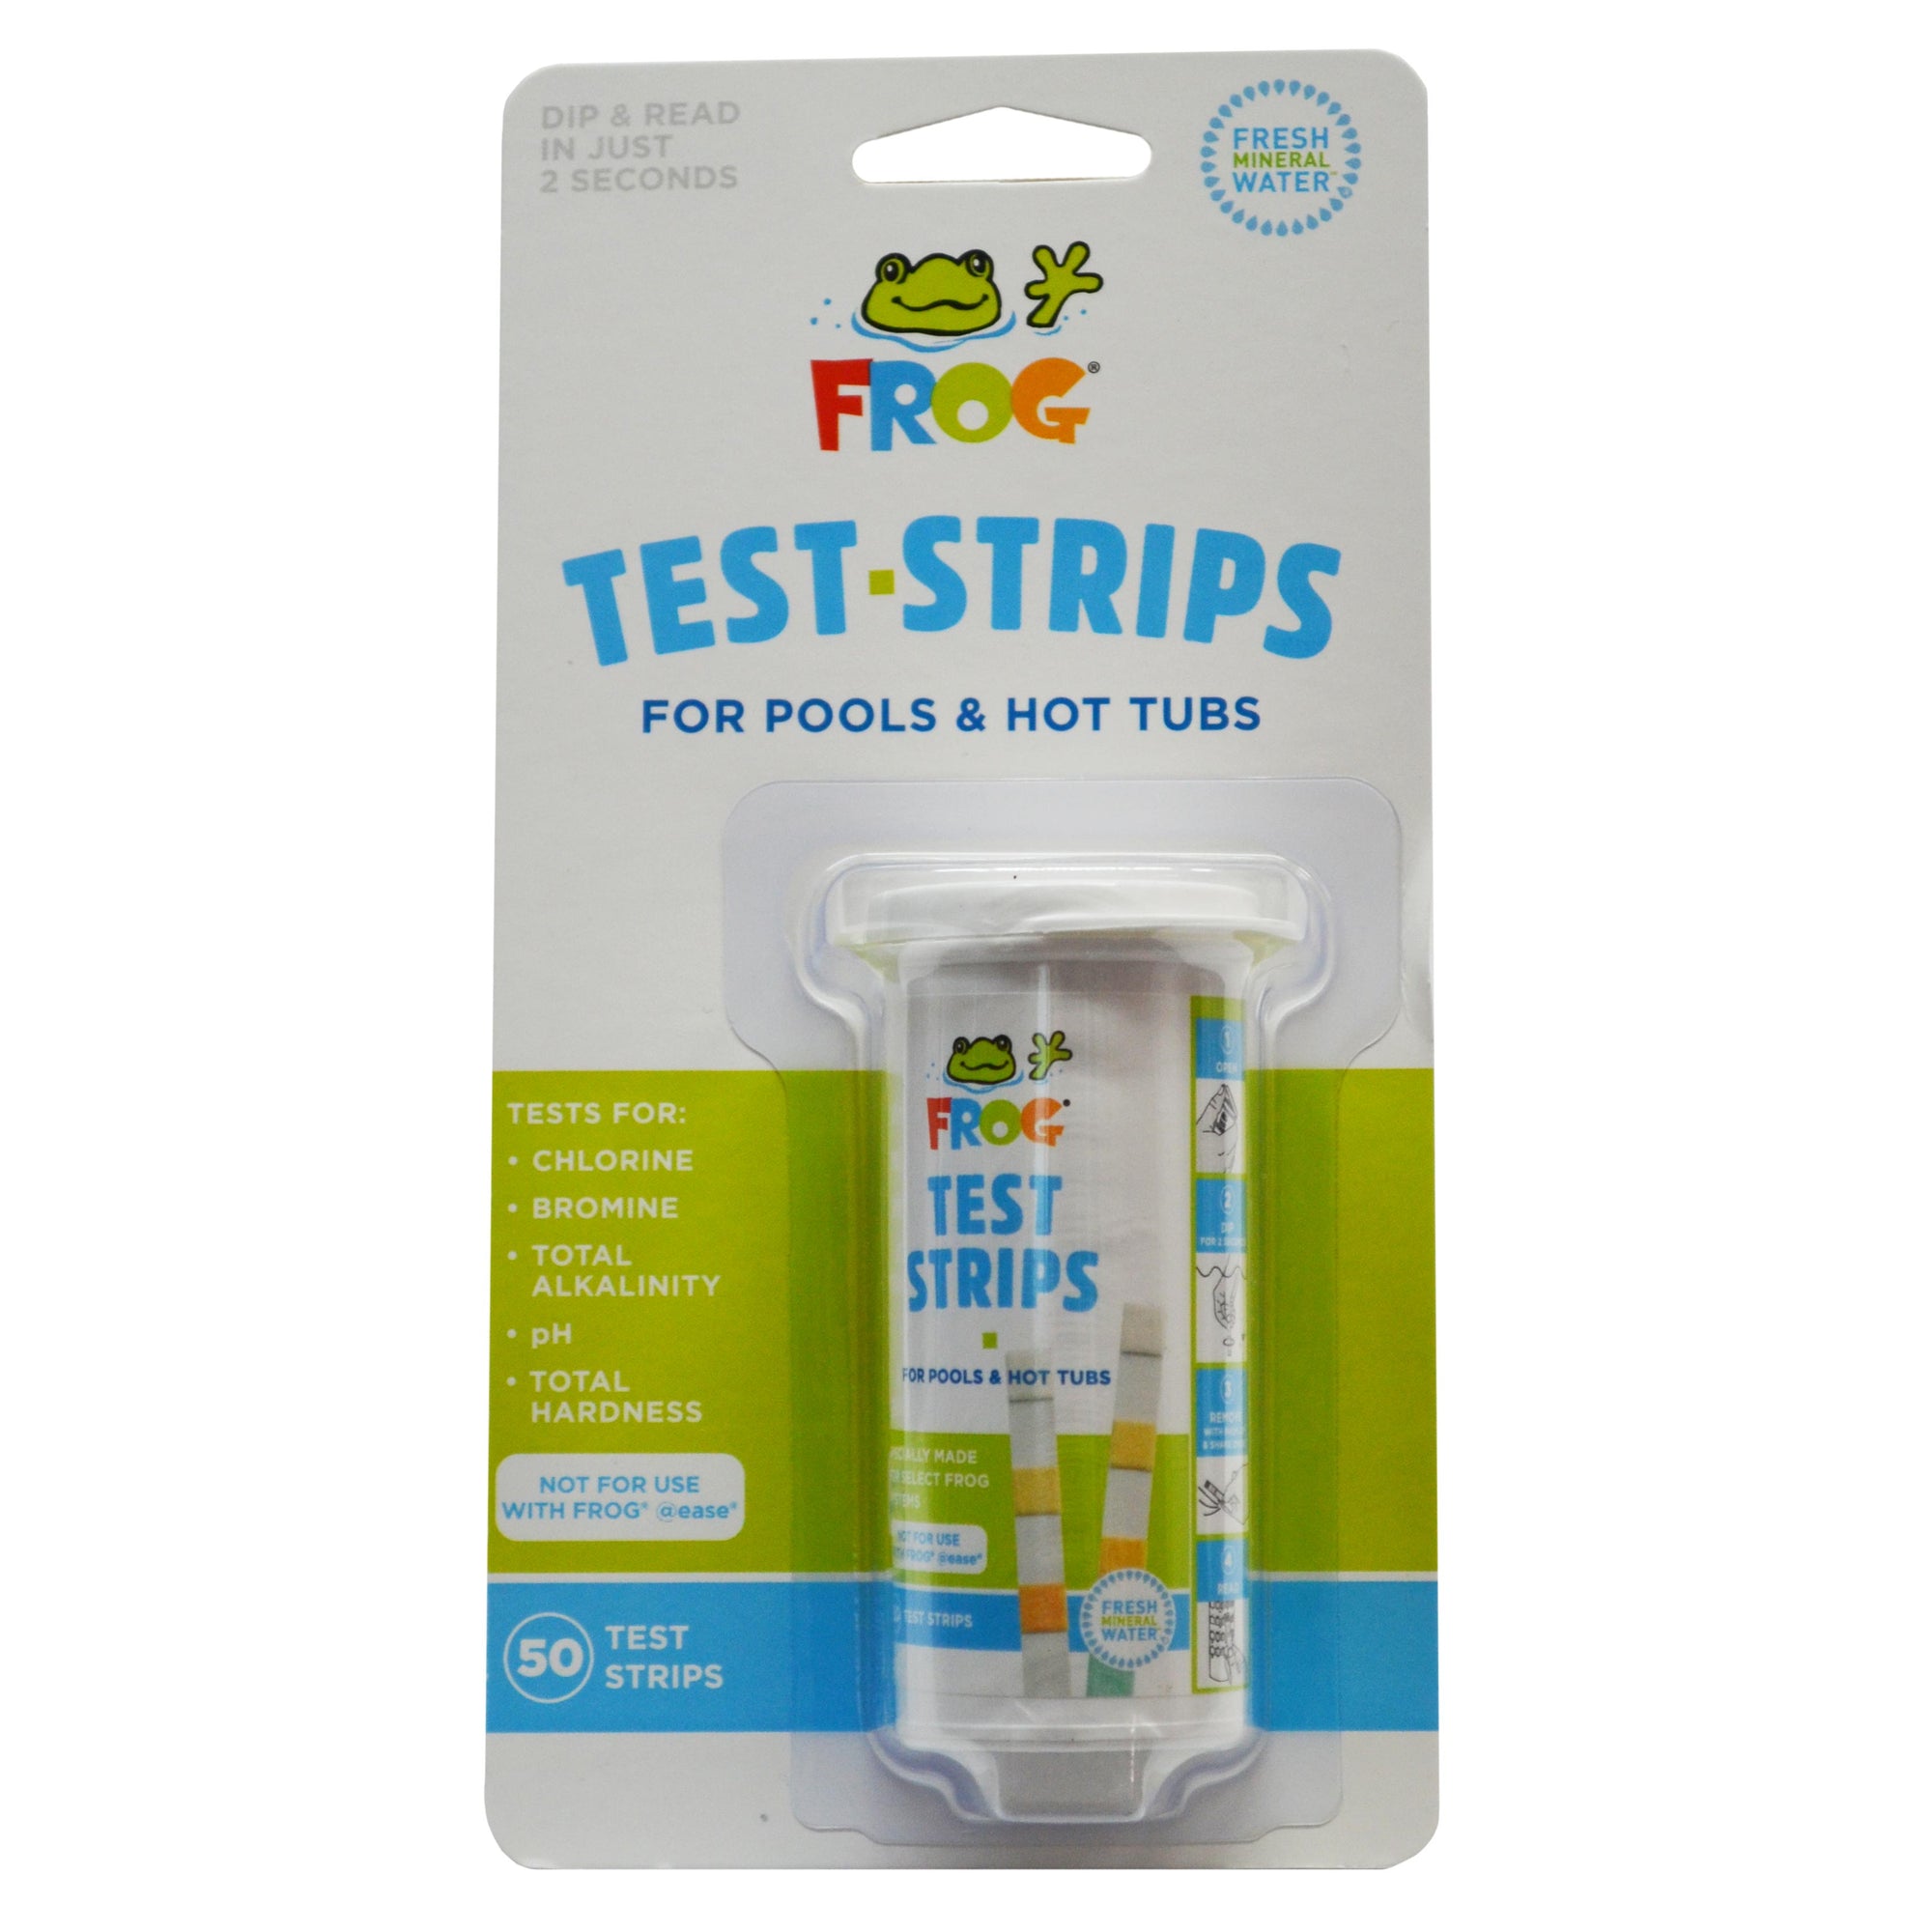 FROG Test Strips for Pools & Hot Tubs - 50 pack